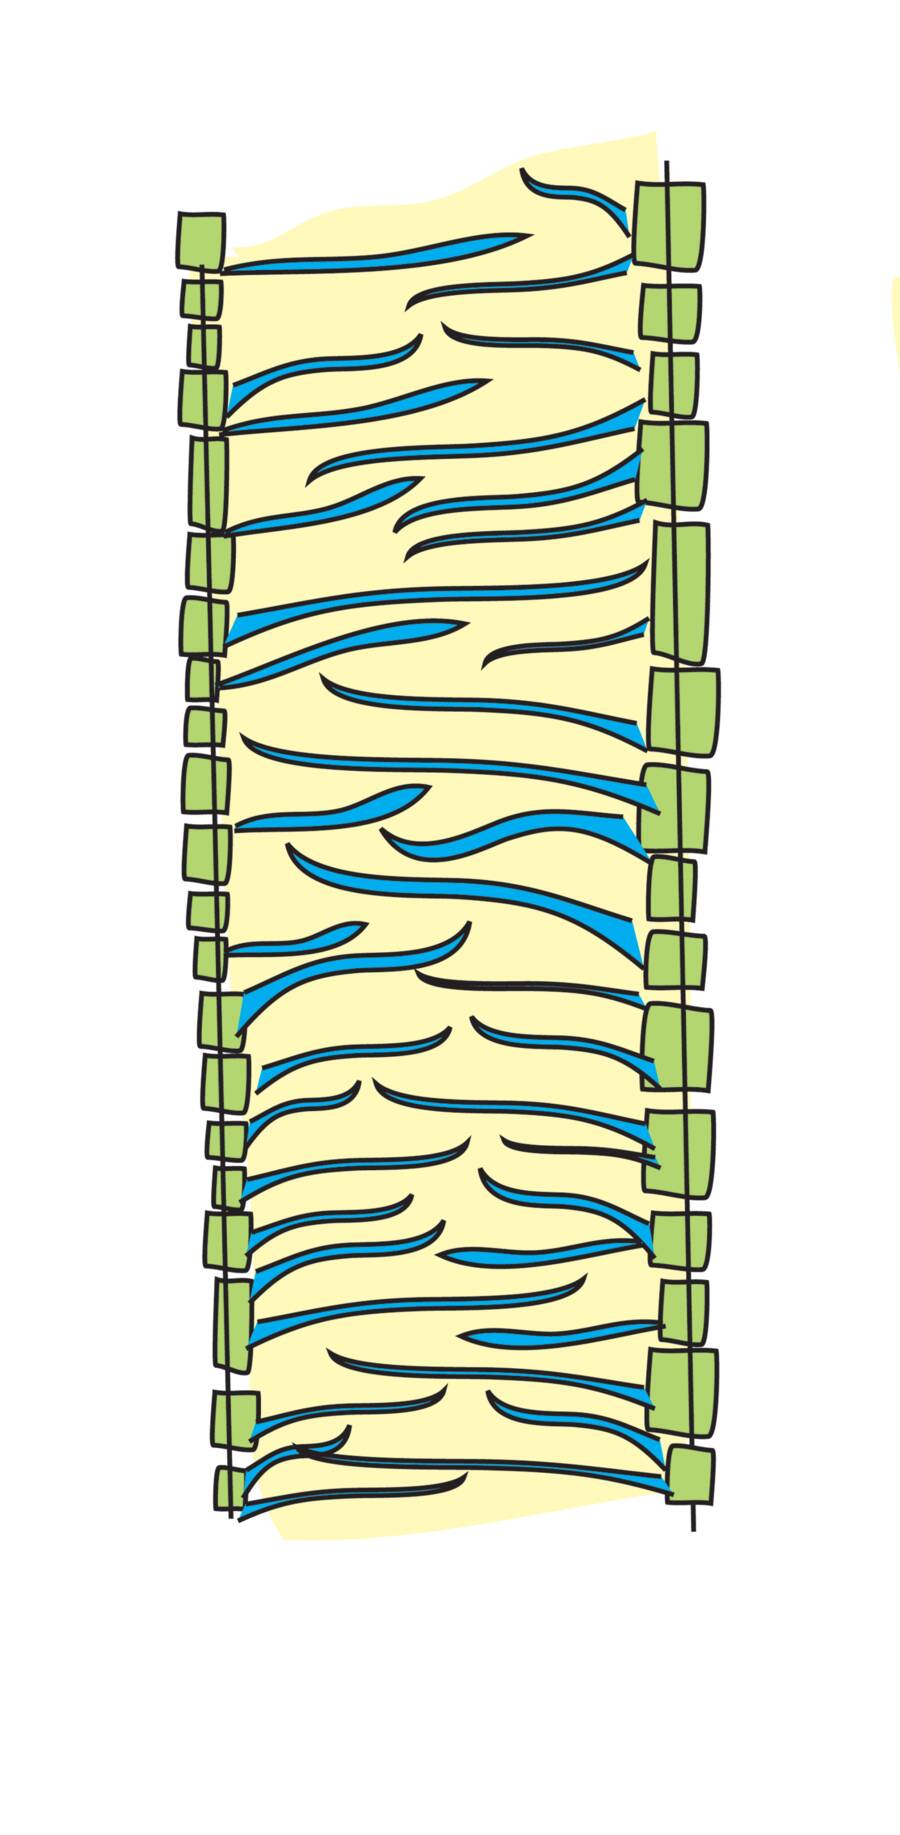 Illustration showing scalariform thickening in final stages of metaxylem formation.